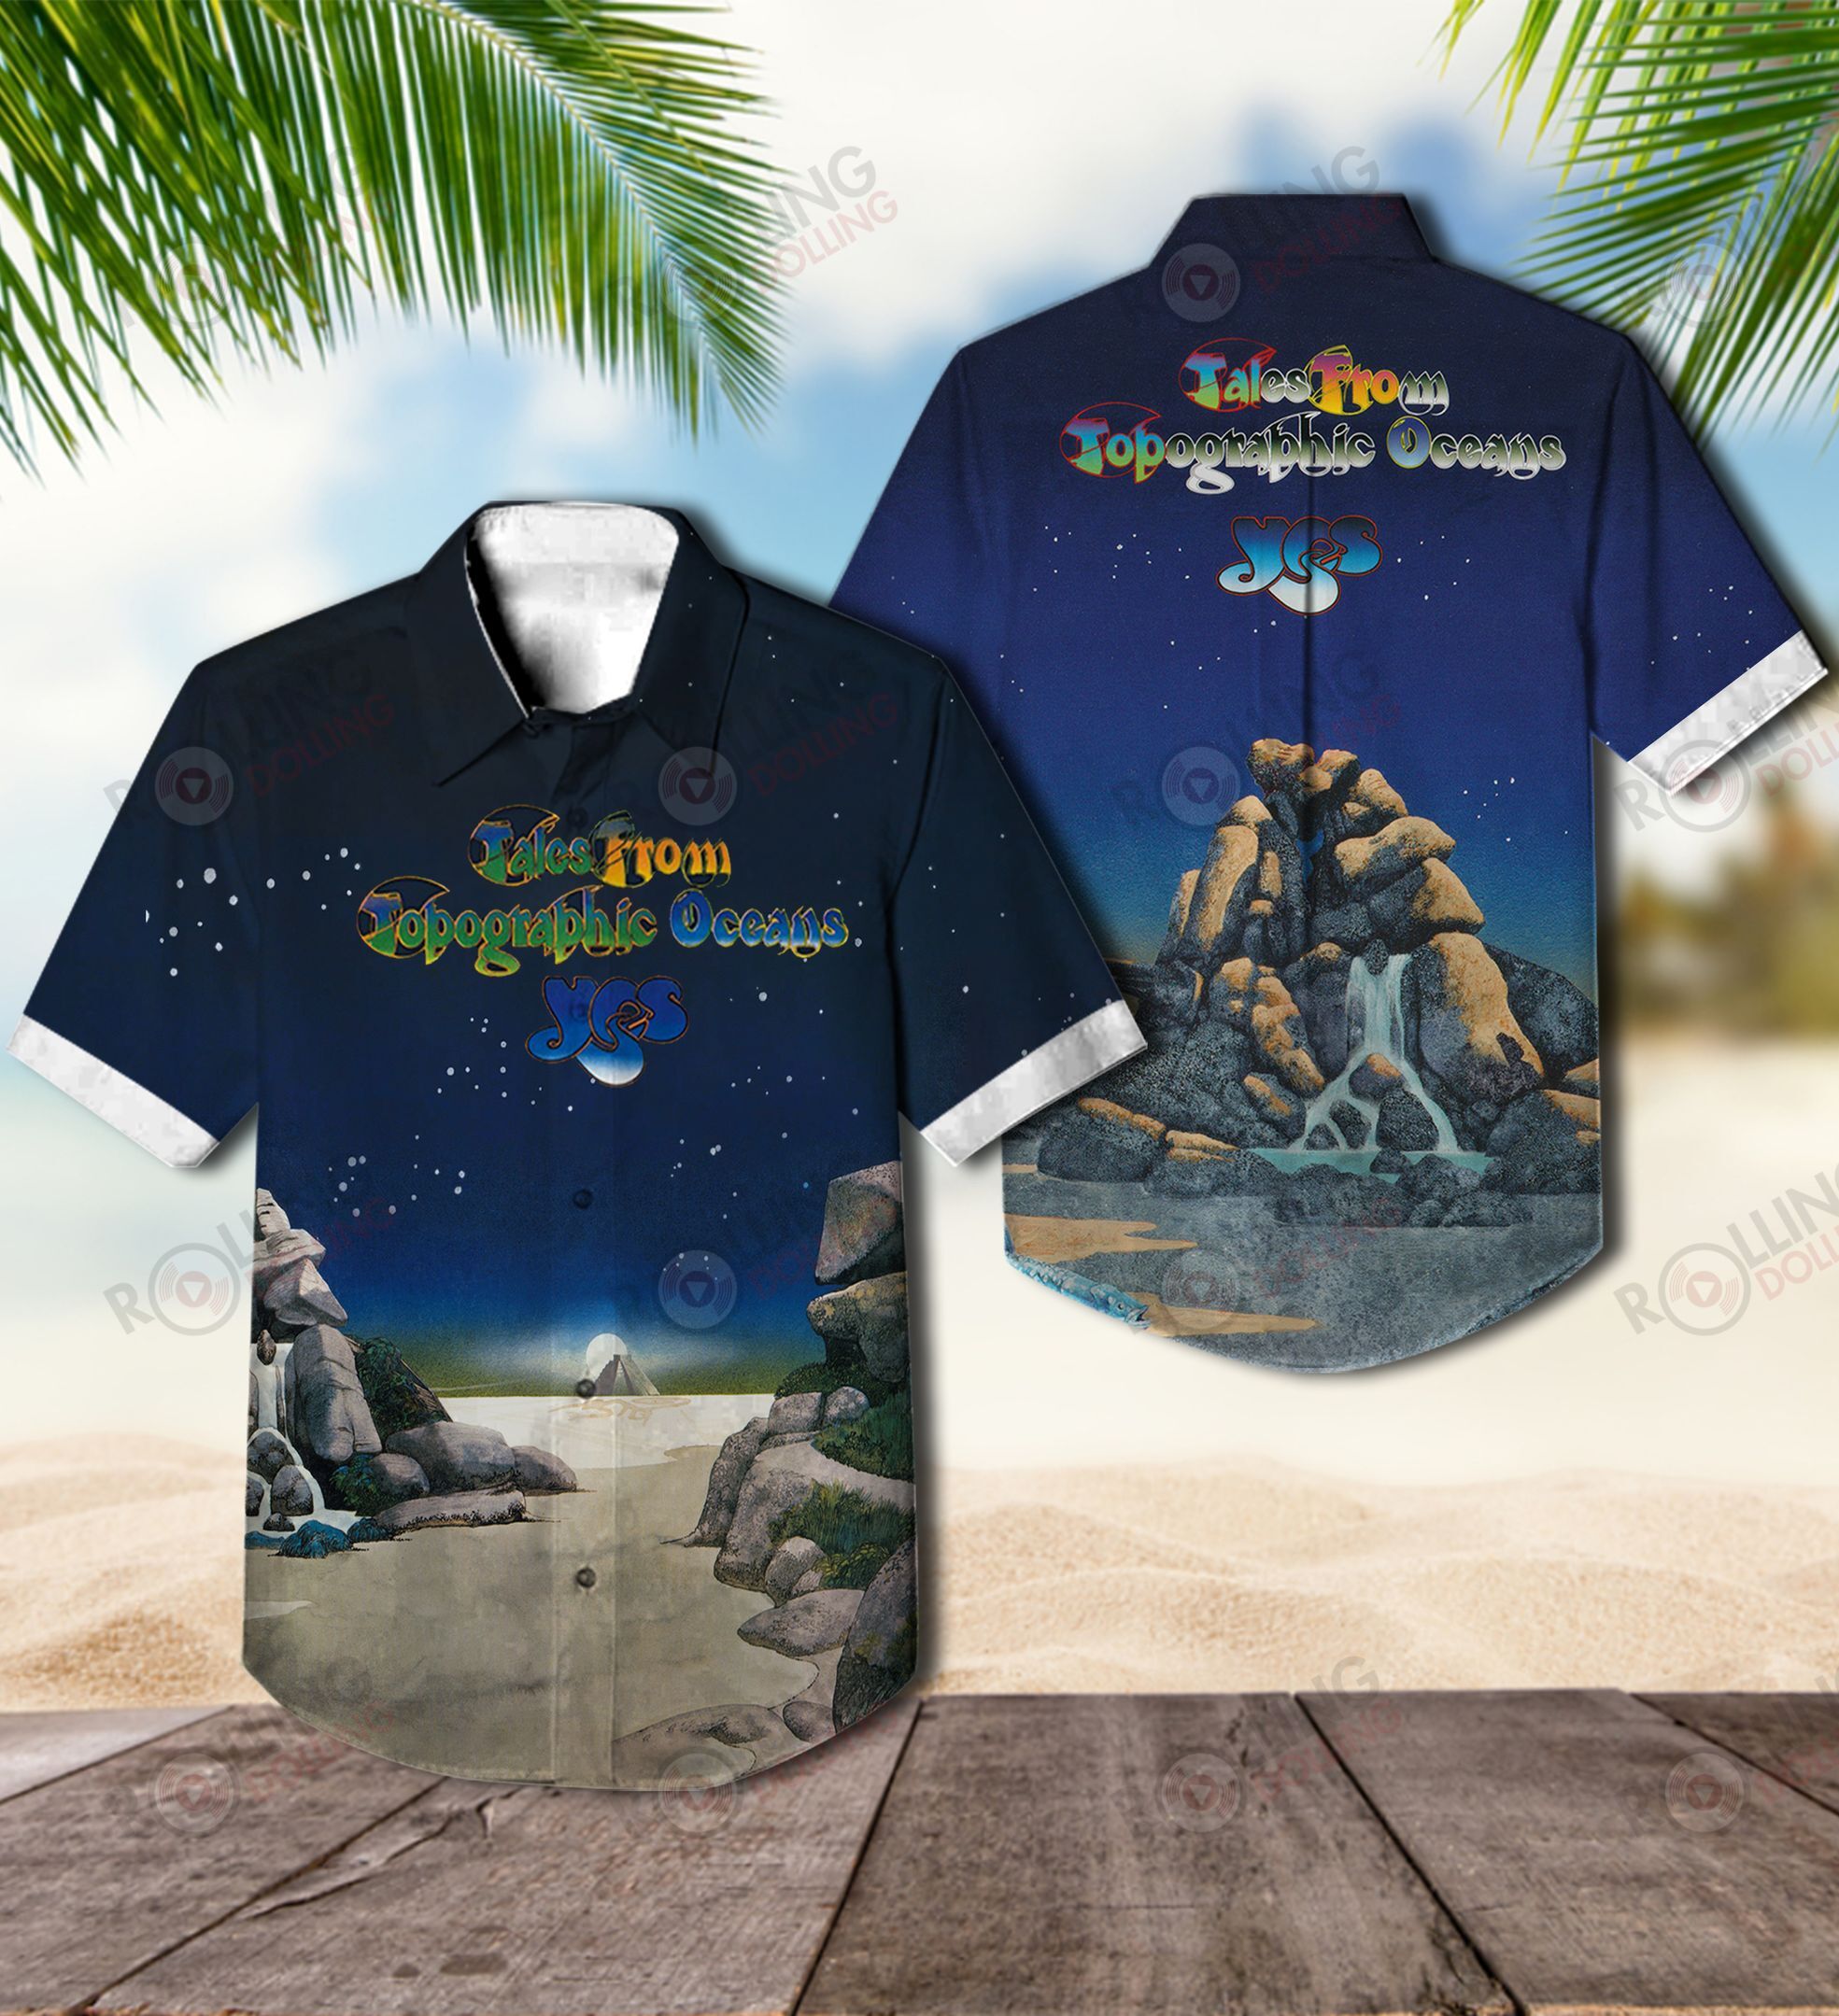 This would make a great gift for any fan who loves Hawaiian Shirt as well as Rock band 41